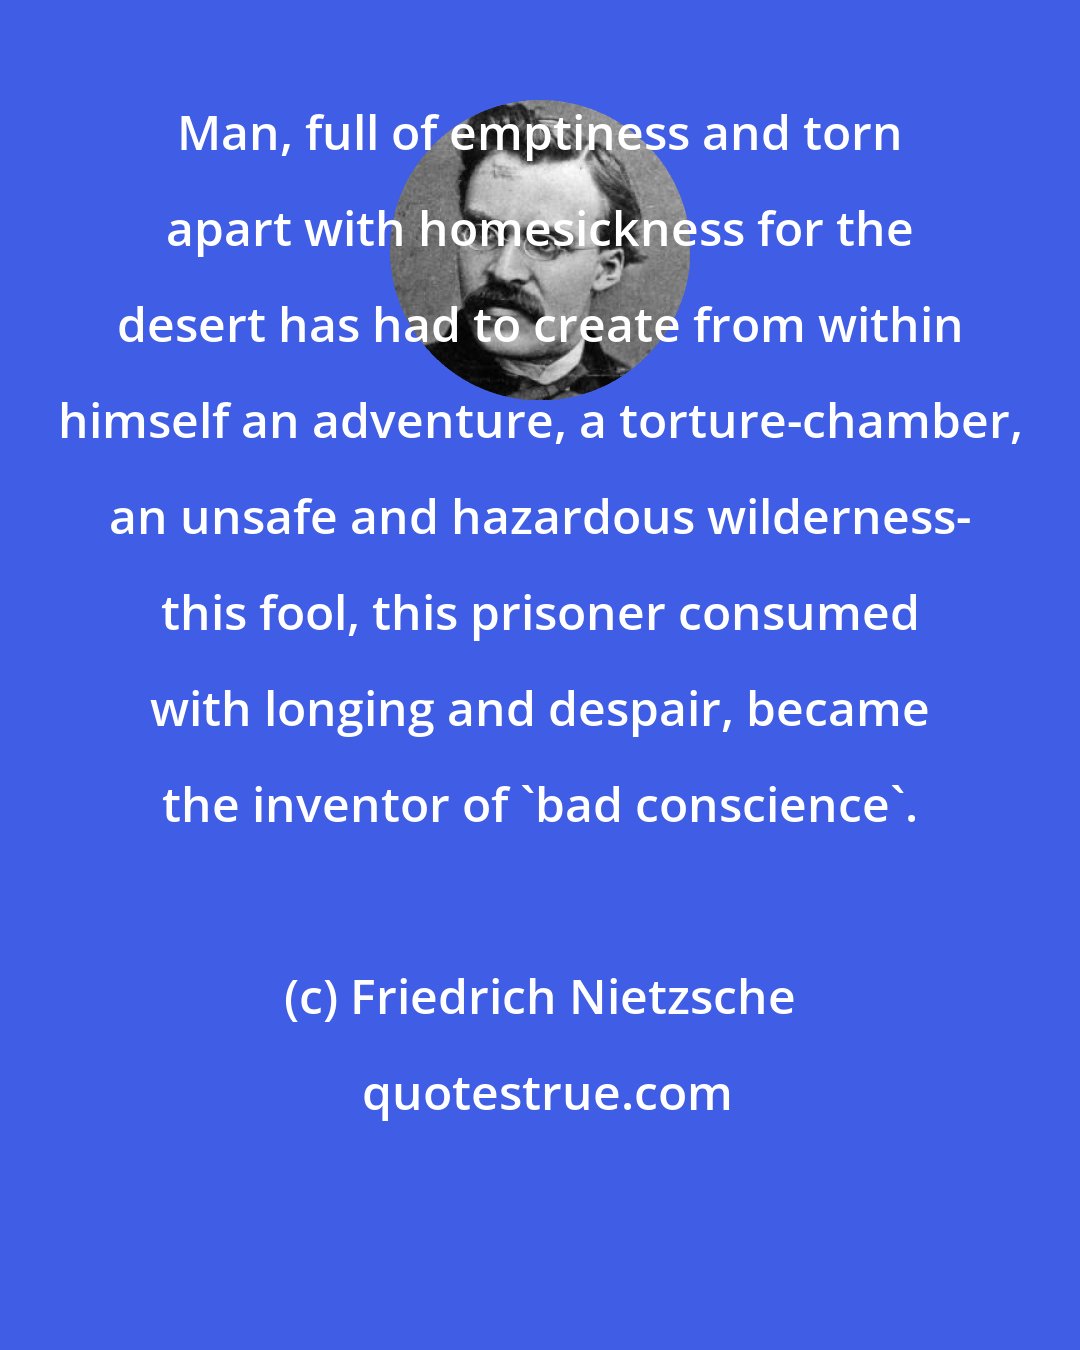 Friedrich Nietzsche: Man, full of emptiness and torn apart with homesickness for the desert has had to create from within himself an adventure, a torture-chamber, an unsafe and hazardous wilderness- this fool, this prisoner consumed with longing and despair, became the inventor of 'bad conscience'.